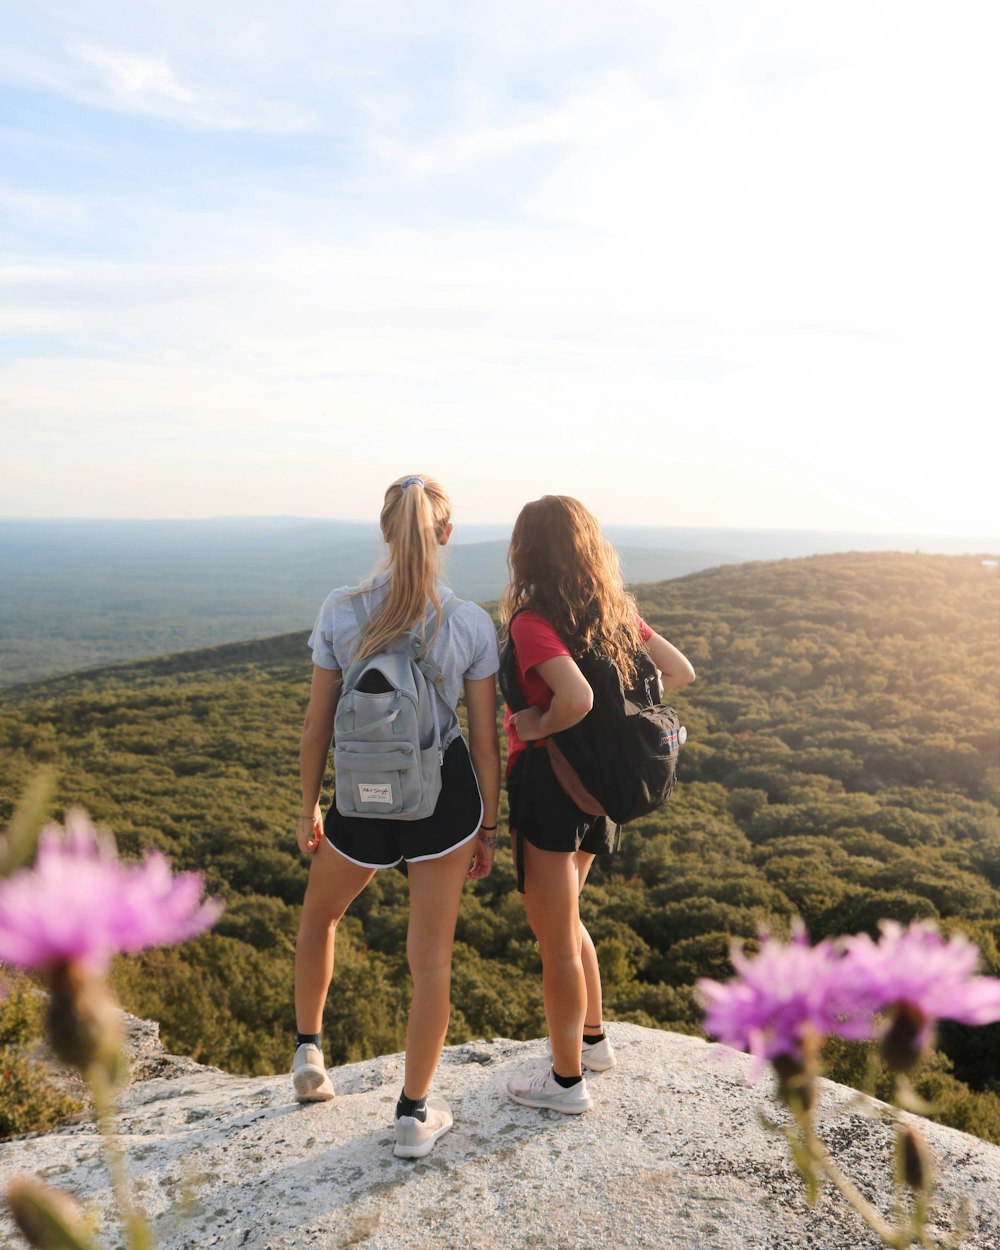 Hiking Girl Pictures  Download Free Images on Unsplash